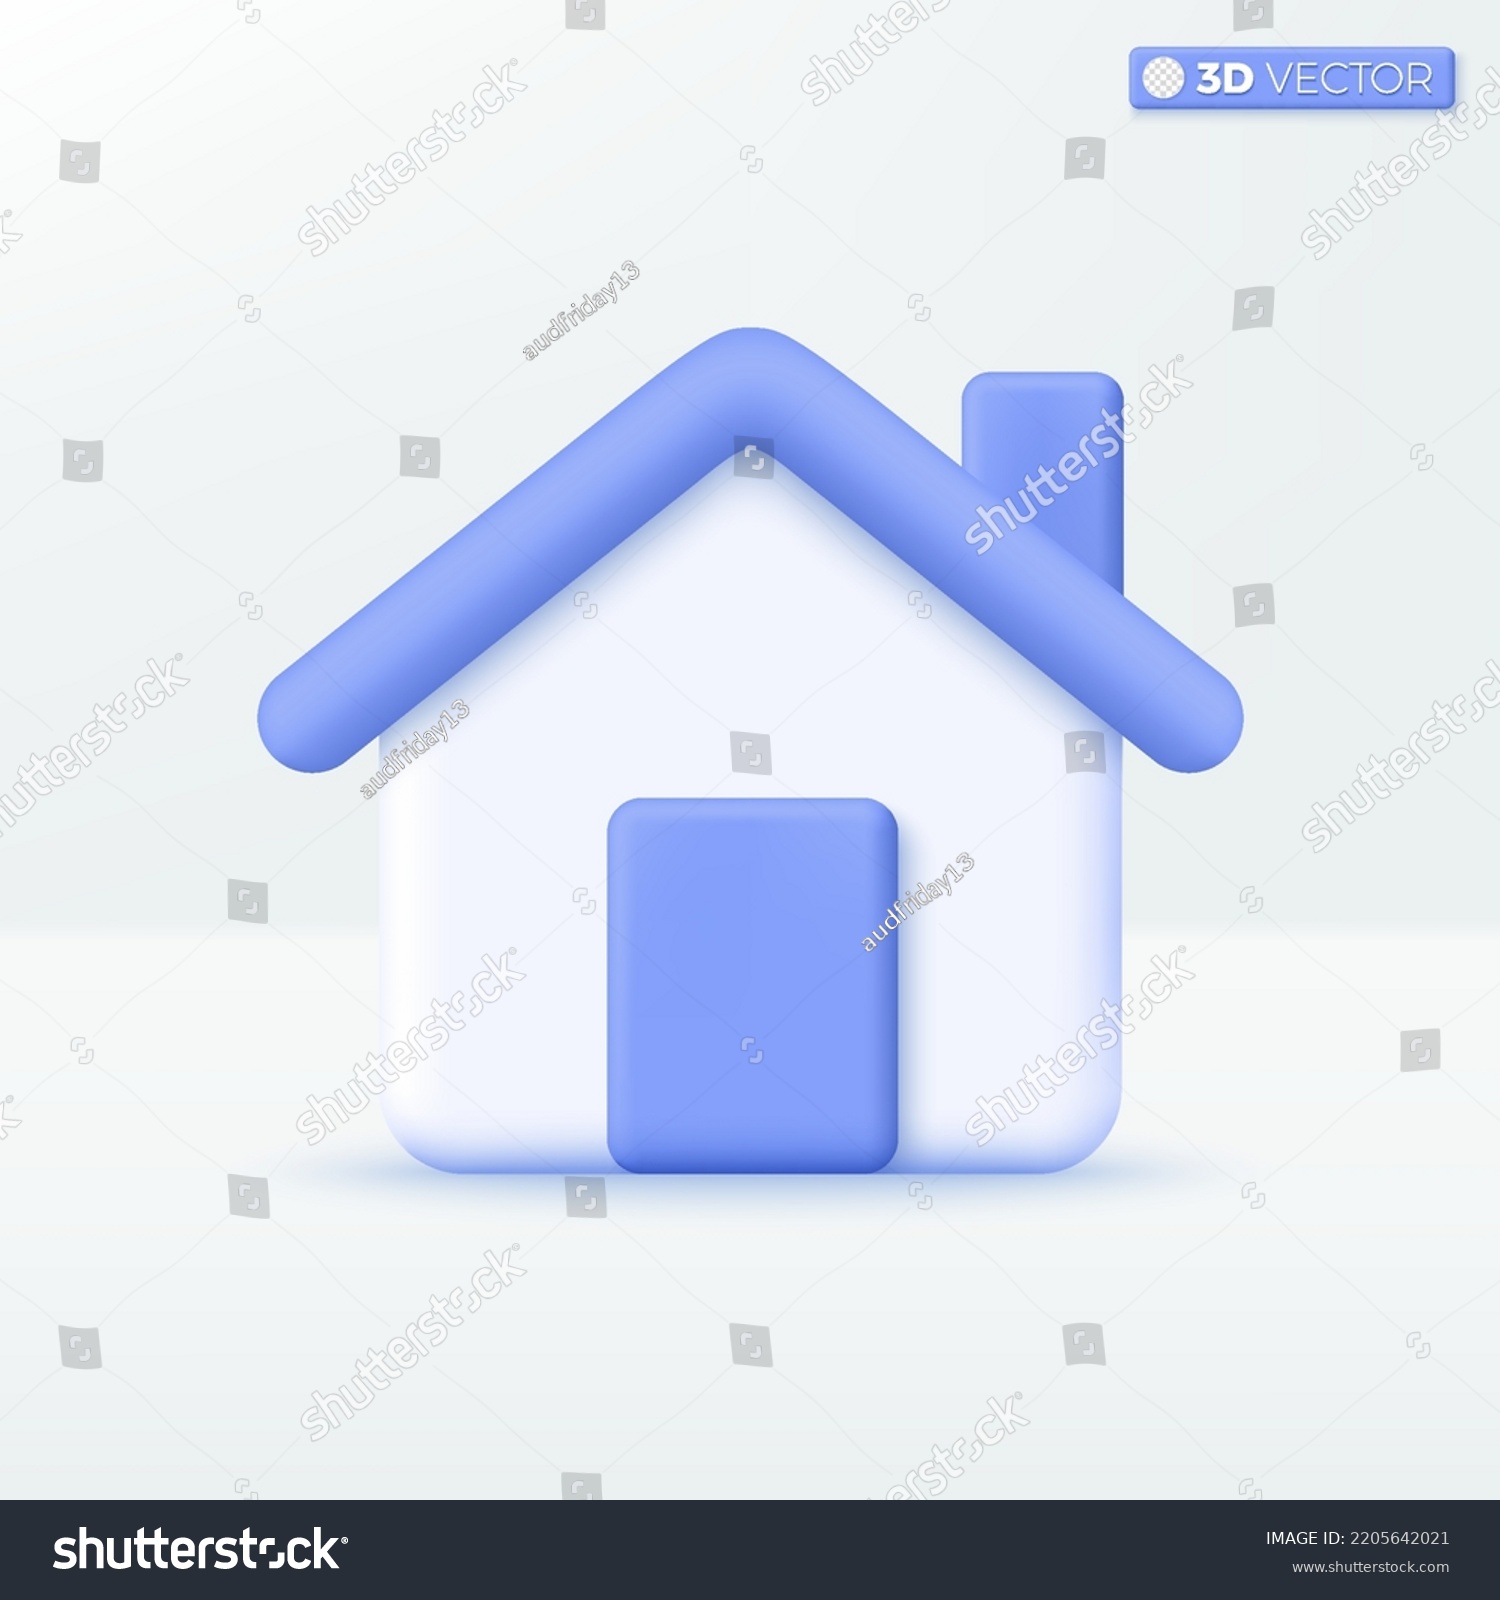 SVG of House icon symbols. Trendy Smart Home, Real estate, loan, mortgage, back concept. 3D vector isolated illustration design. Cartoon pastel Minimal style. You can used for mobile app, ux, ui, print ad. svg